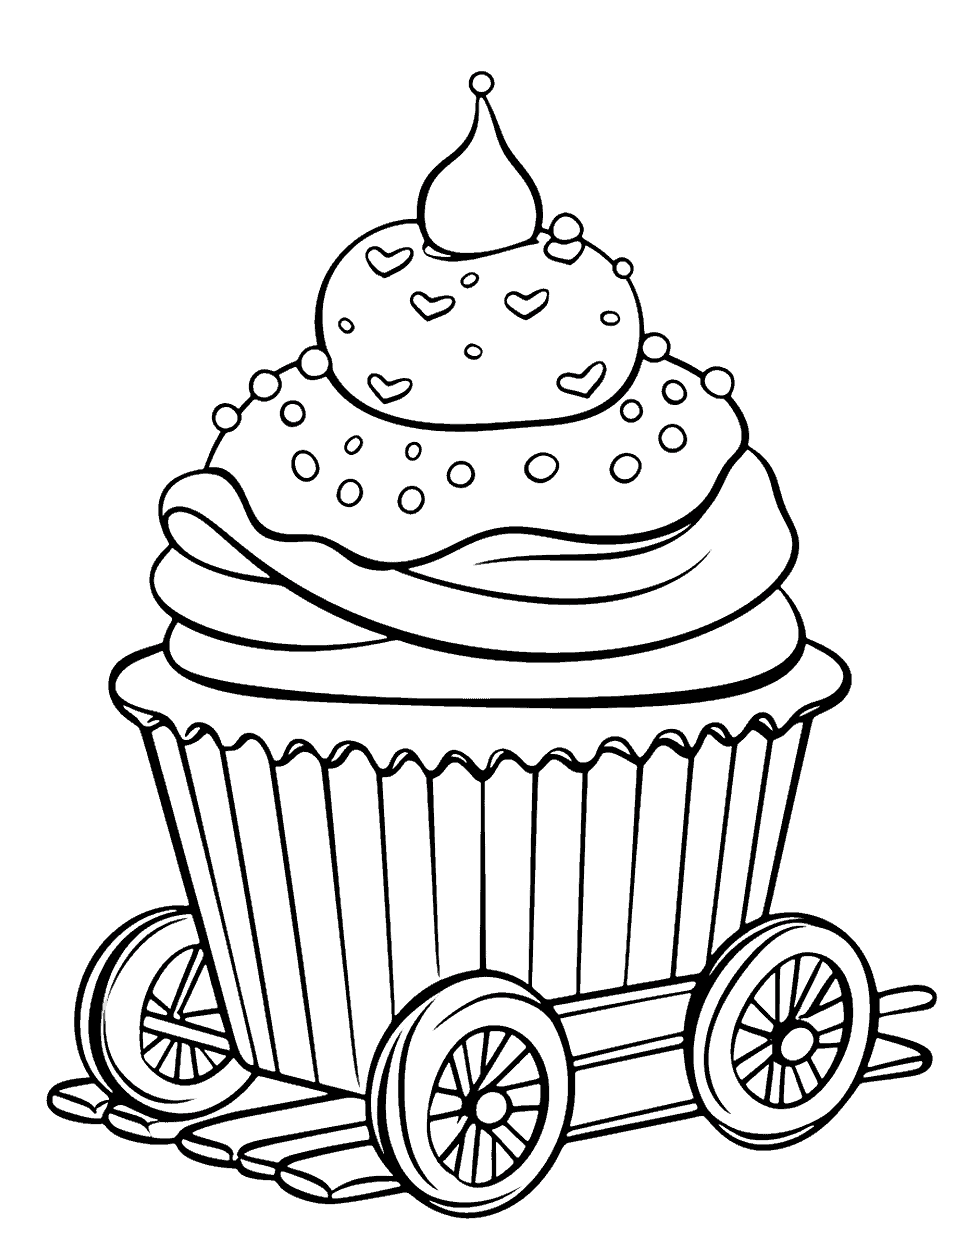 Train-Themed Cupcake Coloring Page - A cupcake decorated with toy train features.